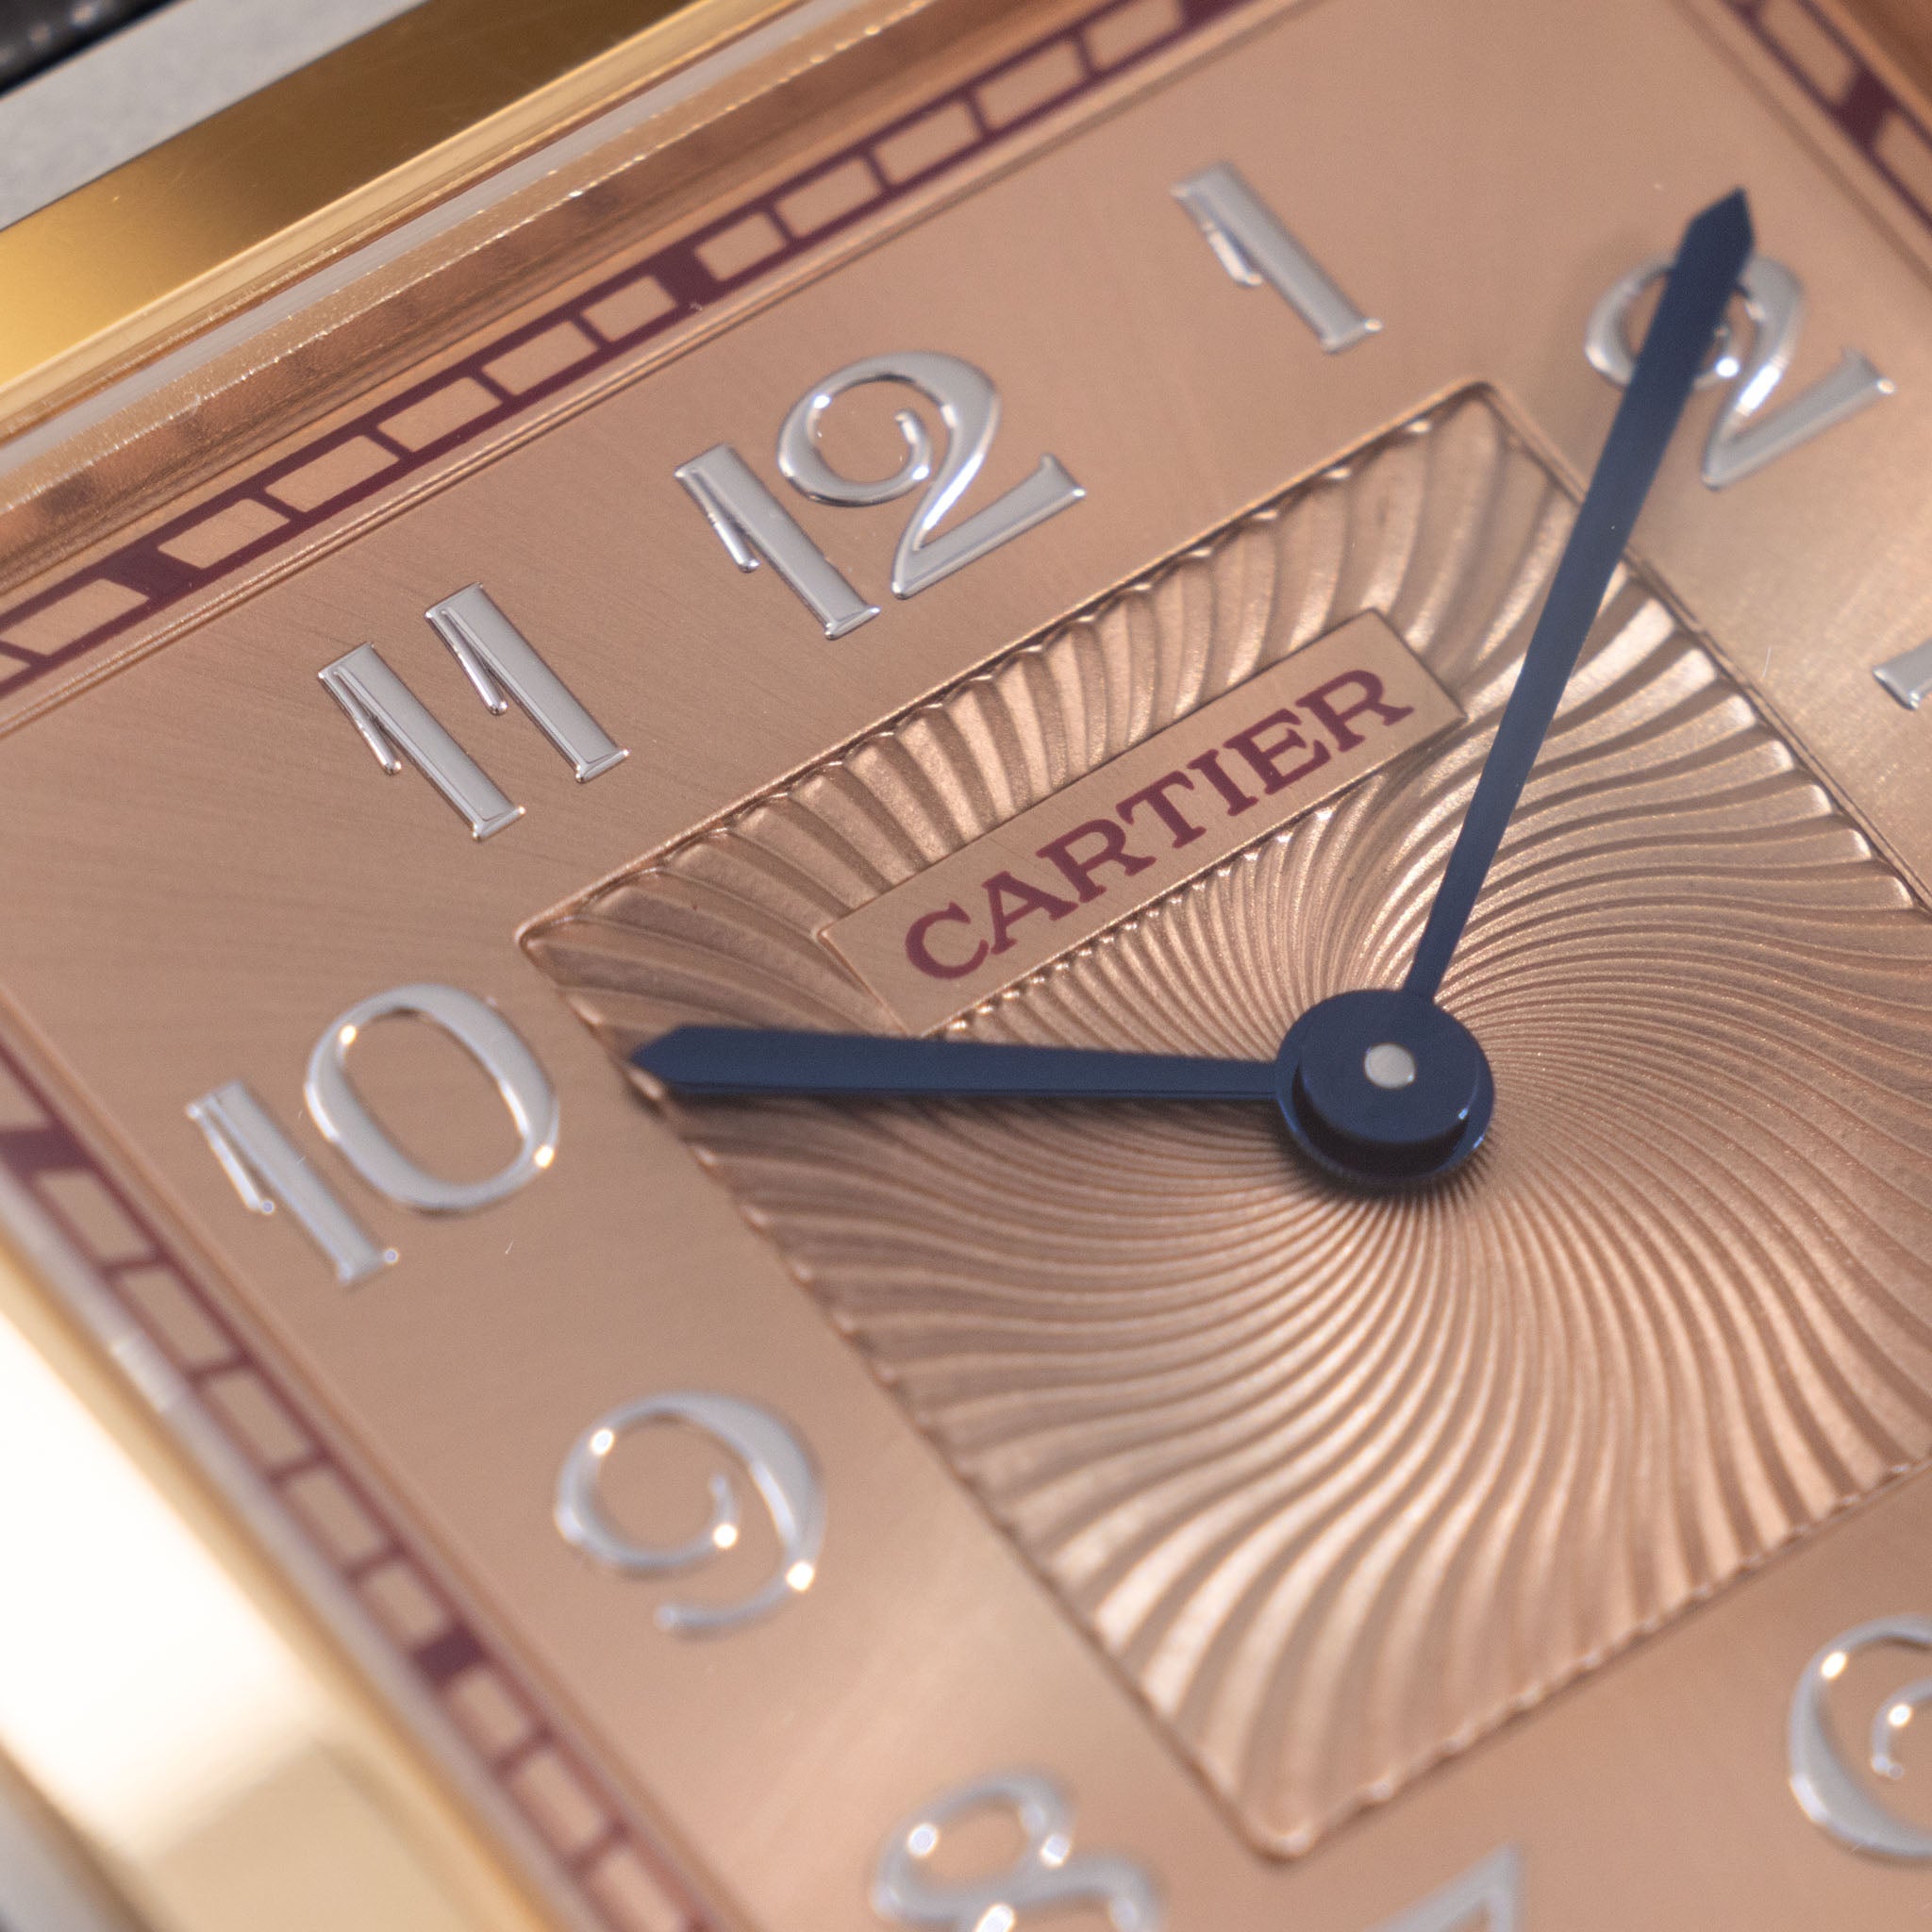 Cartier Santos Dumont Steel and Rose Gold Limited Edition Salmon Dial